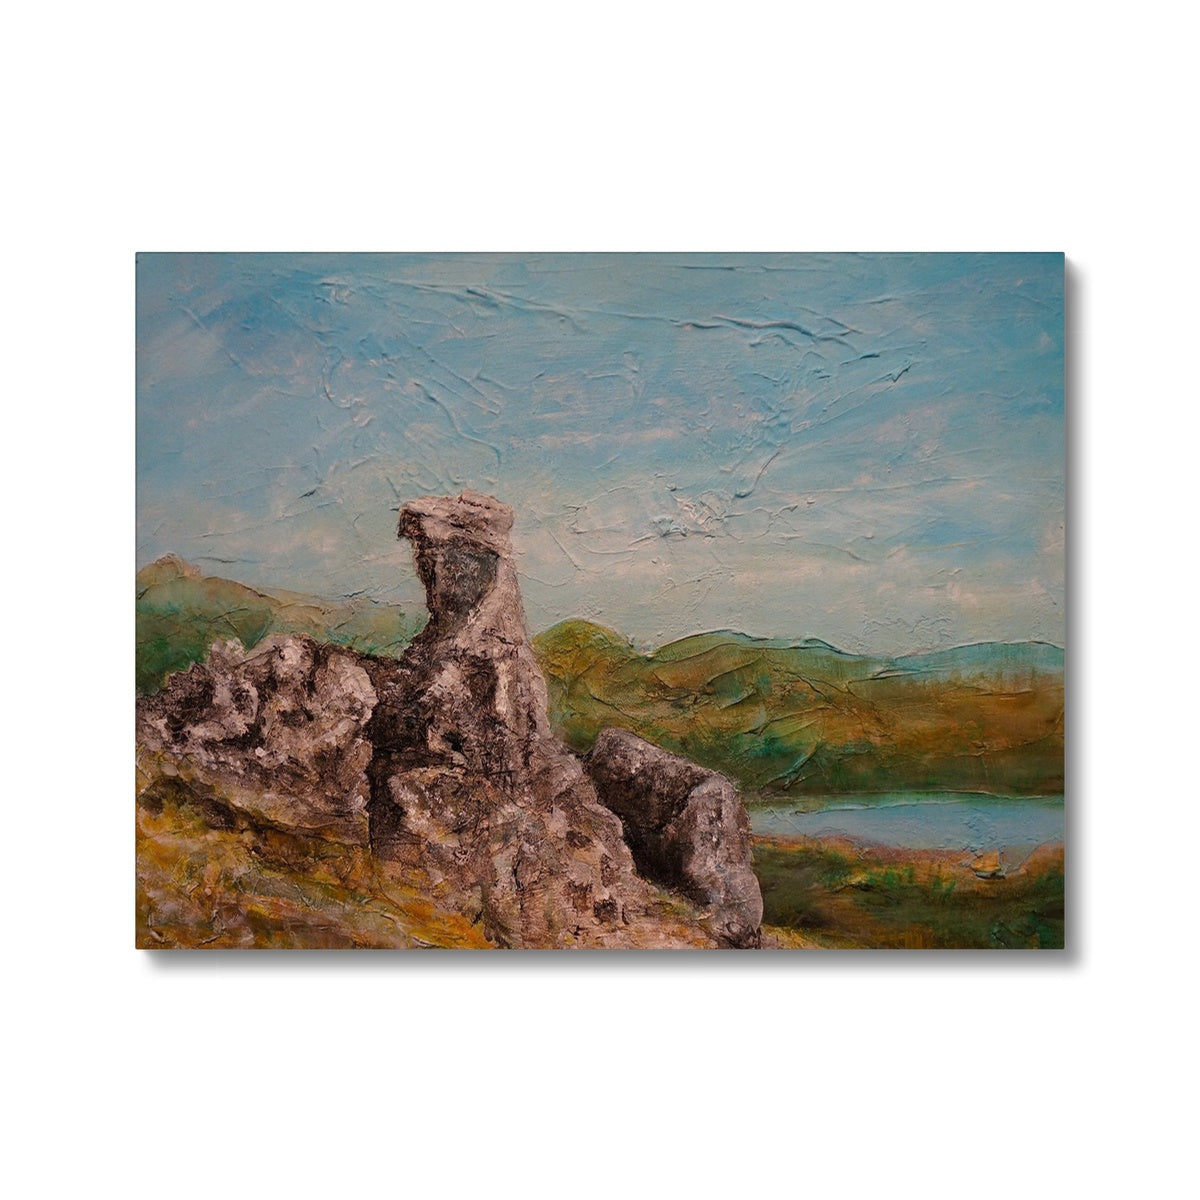 The Cobbler ii Painting | Canvas From Scotland-Contemporary Stretched Canvas Prints-Scottish Lochs & Mountains Art Gallery-24"x18"-Paintings, Prints, Homeware, Art Gifts From Scotland By Scottish Artist Kevin Hunter